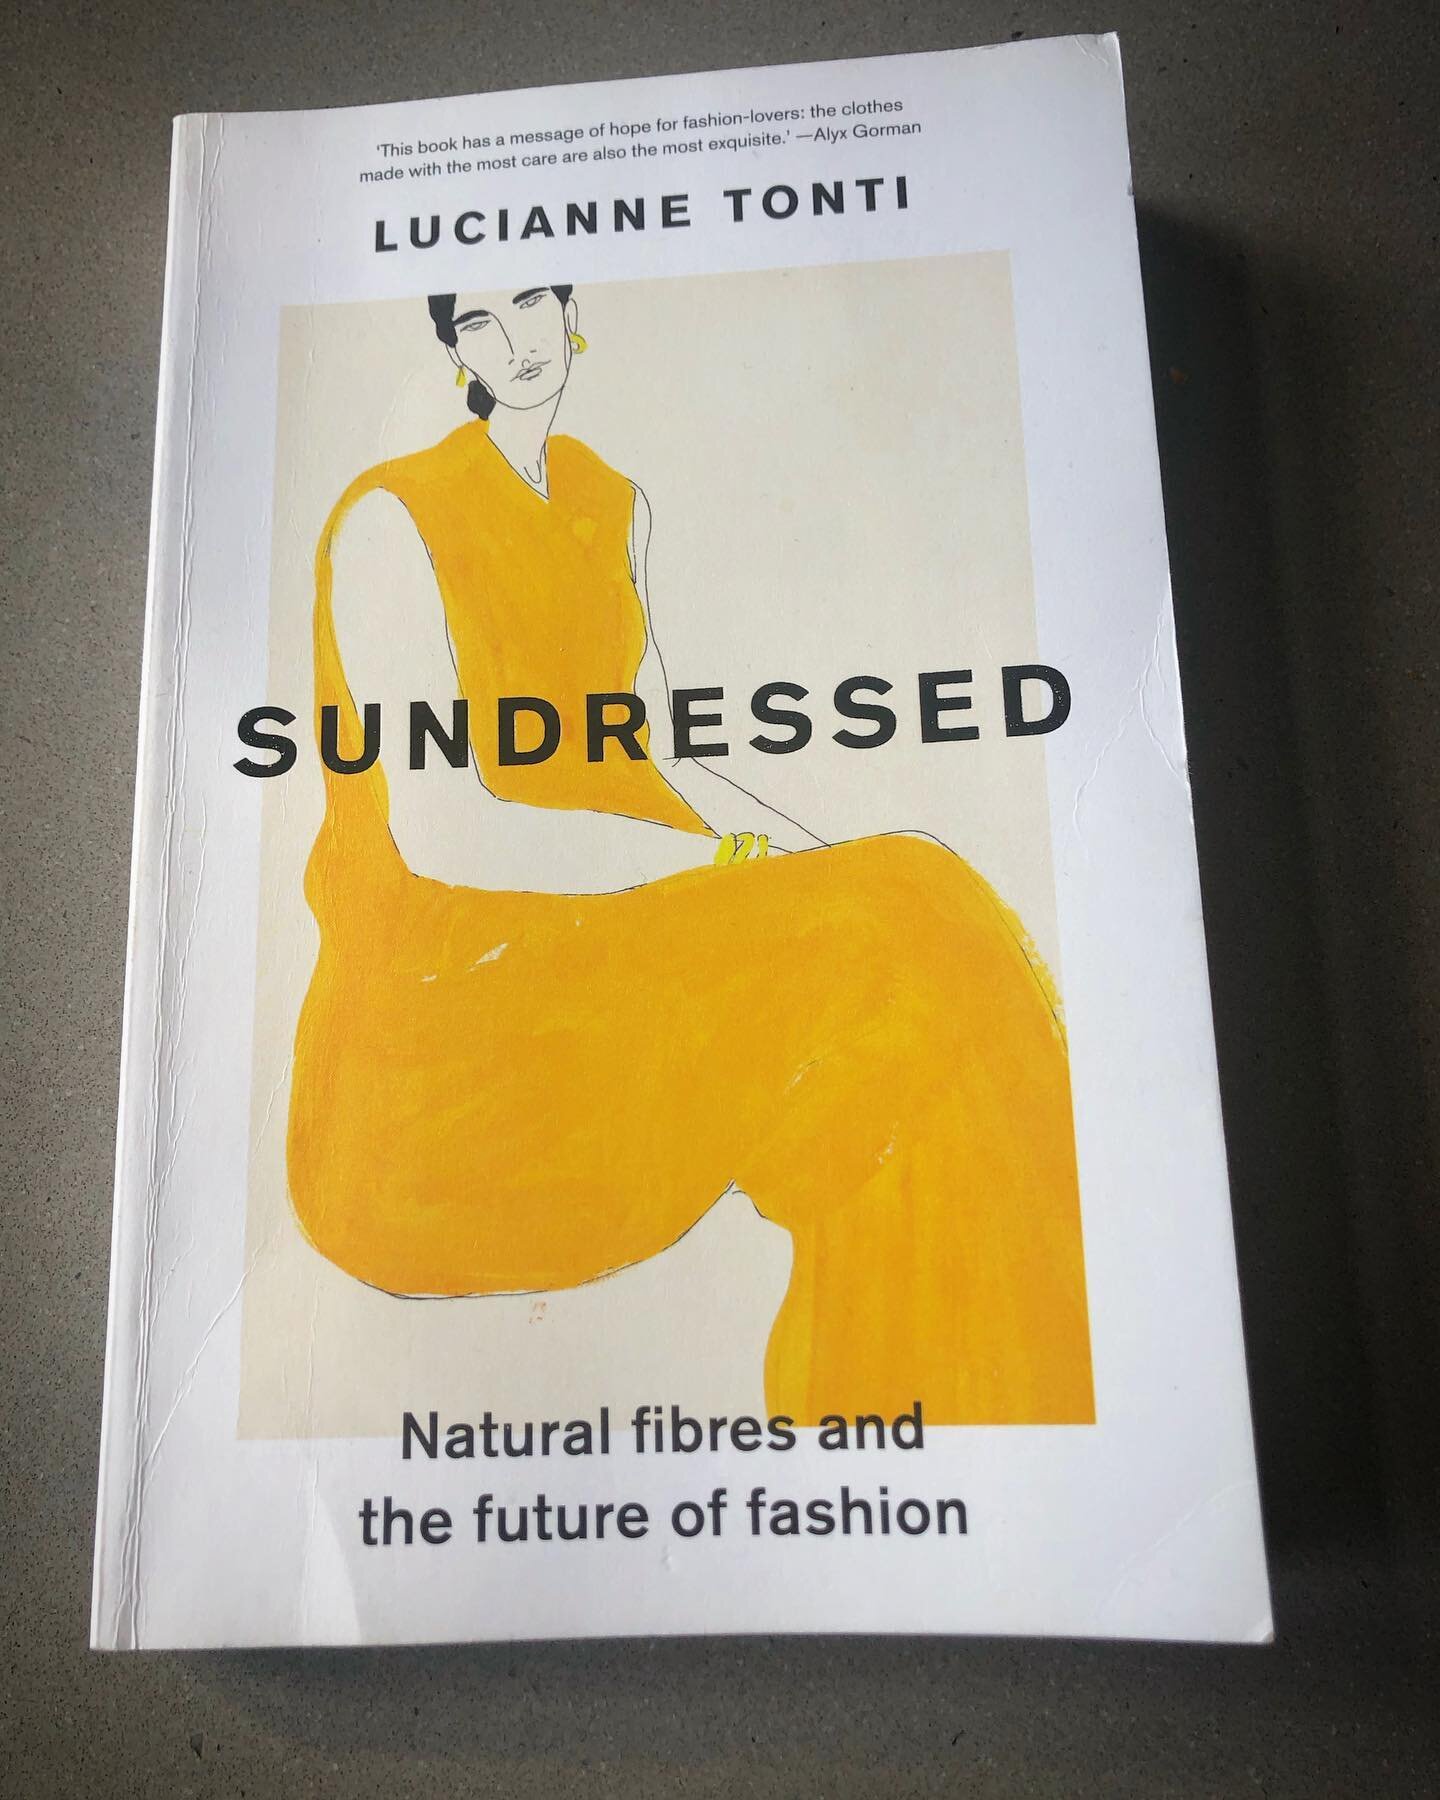 I highly, highly, highly recommend this book! I spent all yesterday reading it and it&rsquo;s ace! Blending story with facts, @luciannetonti has told us what needs to change and how if we are to truly build a sustainable fashion sector. The book laun